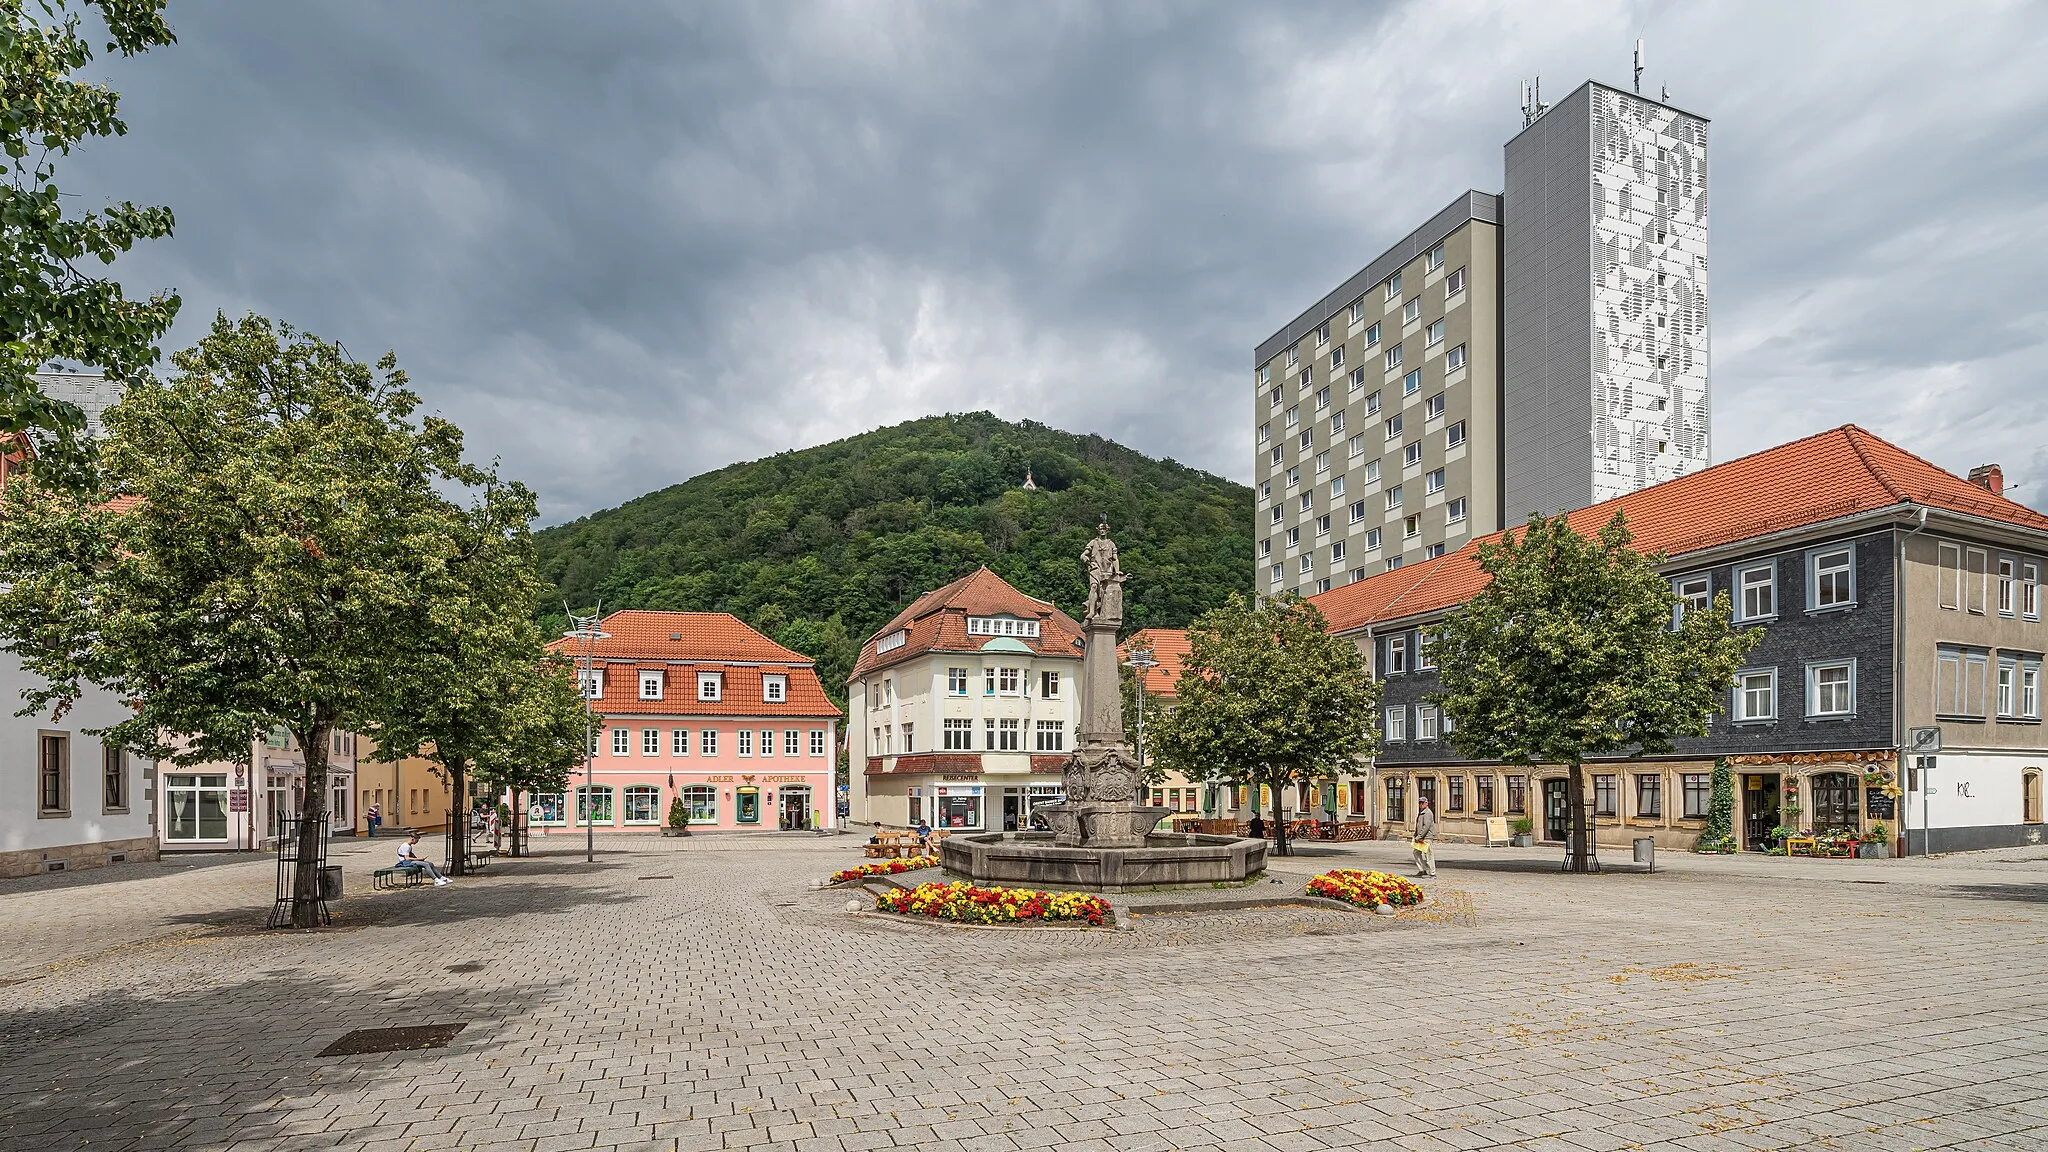 Photo showing: Market square in Suhl, Thuringia, Germany